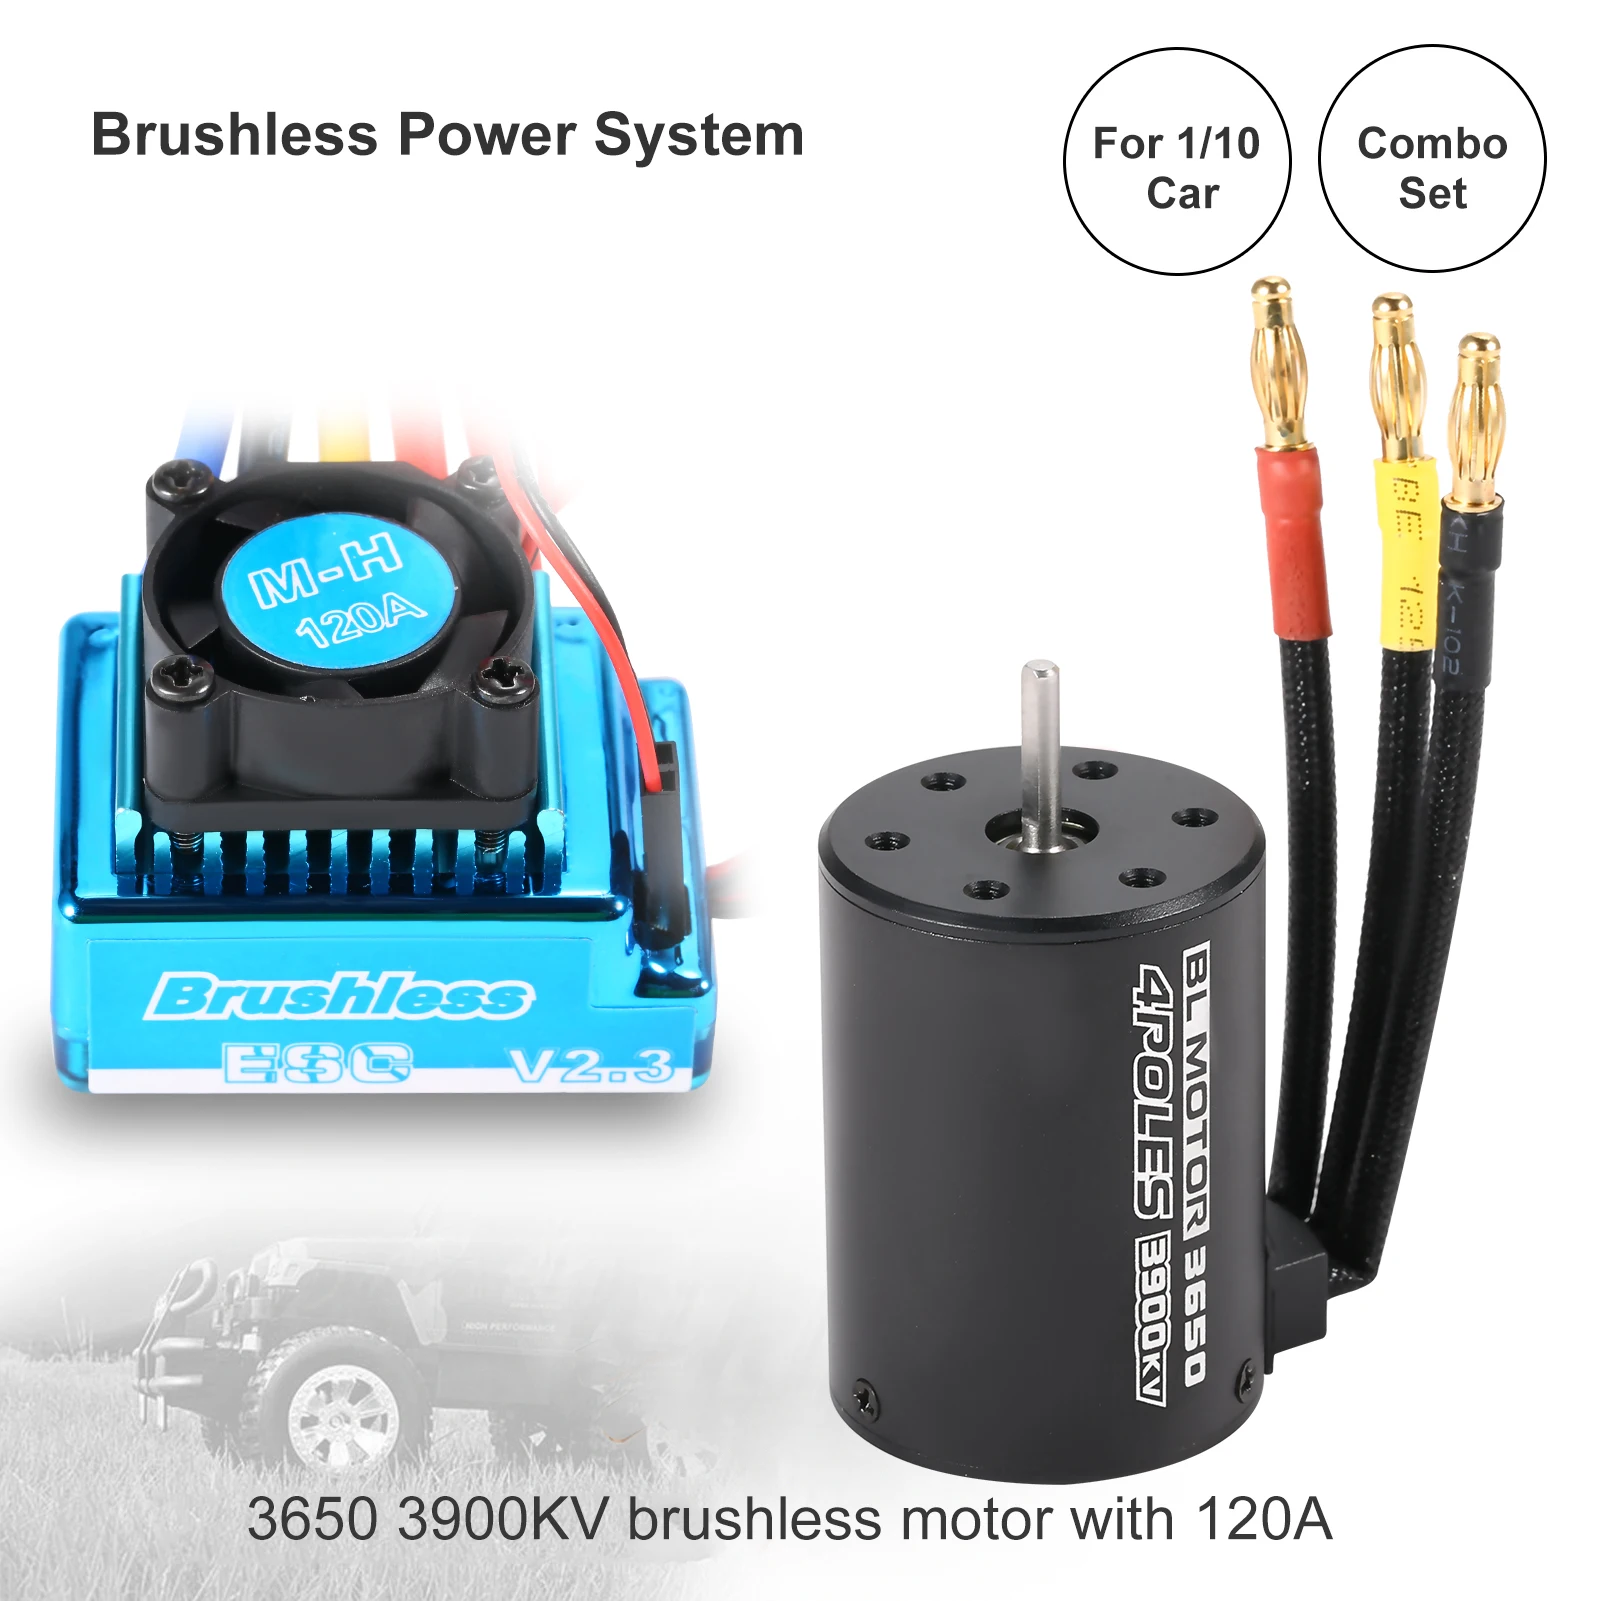 

3650 4300KV Waterproof Brushless Motor with 120A Brushless ESC with 5.8V/3A BEC Set for 1/10 RC Car RC Parts